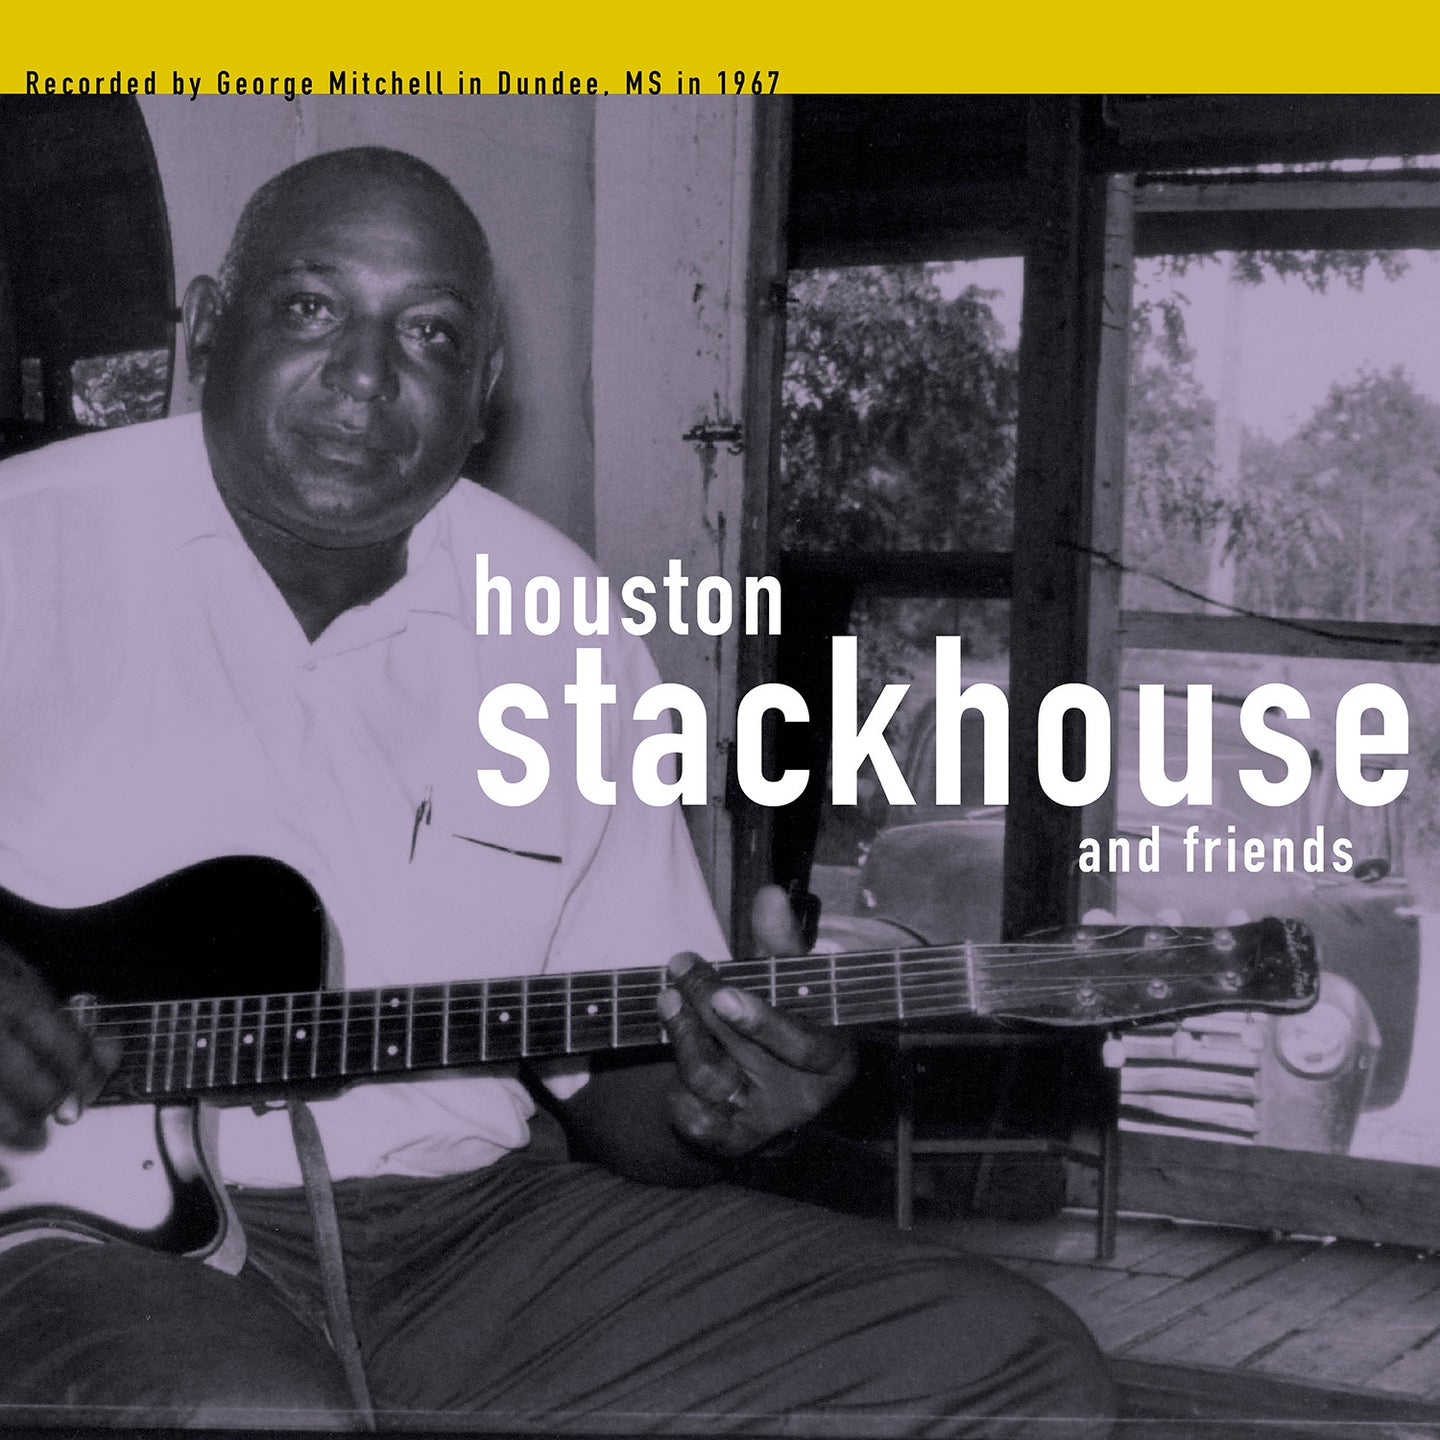 Houston Stackhouse & Friends: George Mitchell Collection